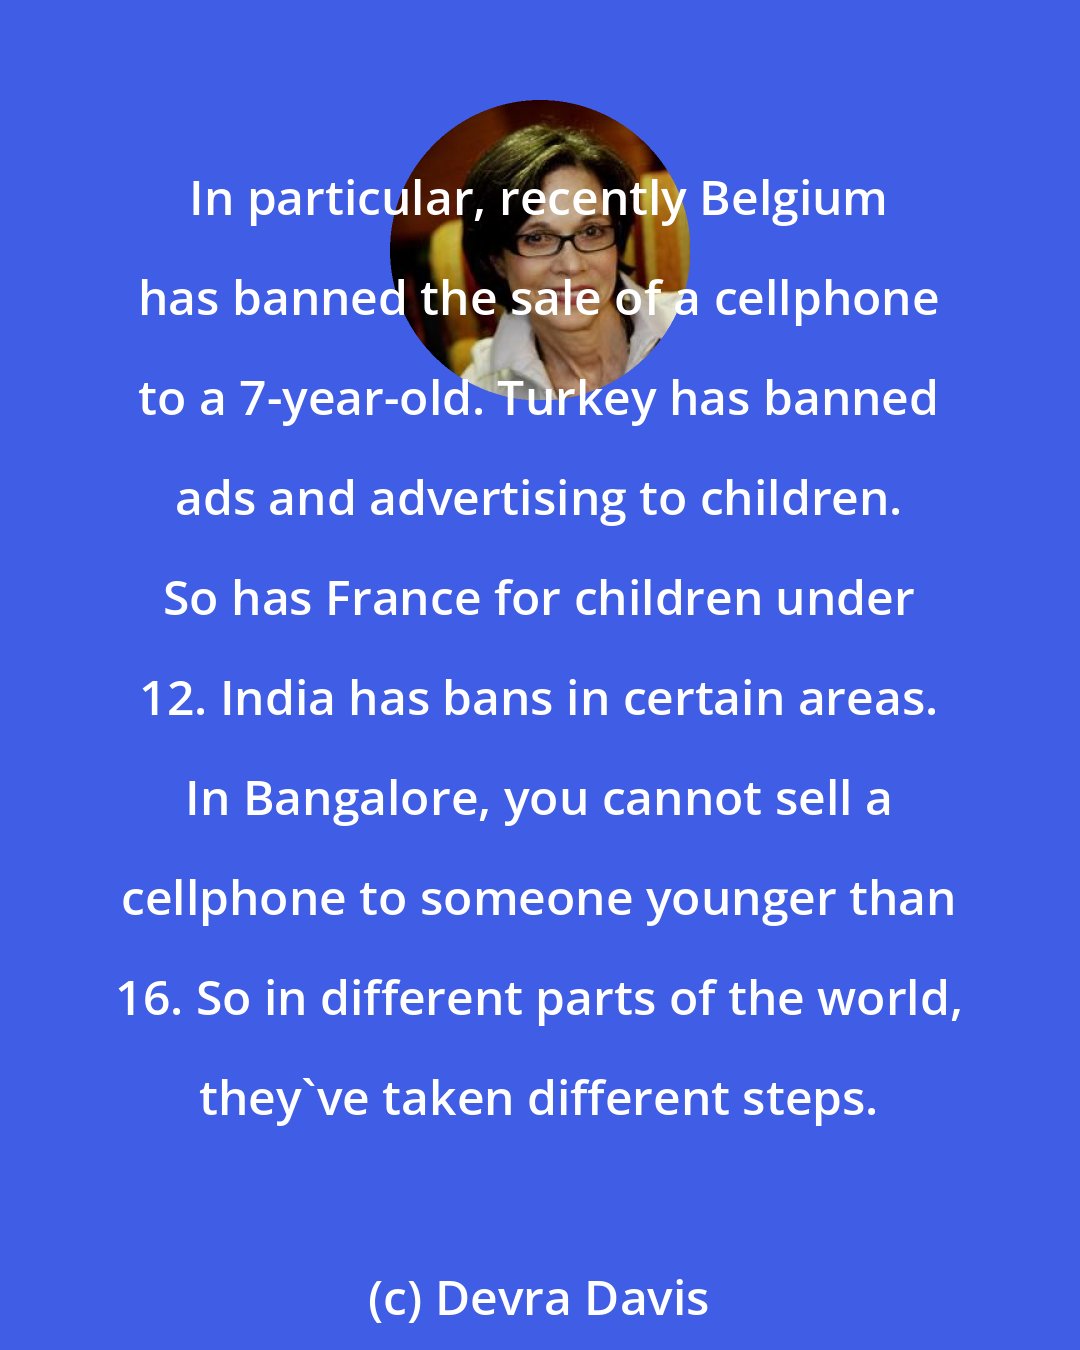 Devra Davis: In particular, recently Belgium has banned the sale of a cellphone to a 7-year-old. Turkey has banned ads and advertising to children. So has France for children under 12. India has bans in certain areas. In Bangalore, you cannot sell a cellphone to someone younger than 16. So in different parts of the world, they've taken different steps.